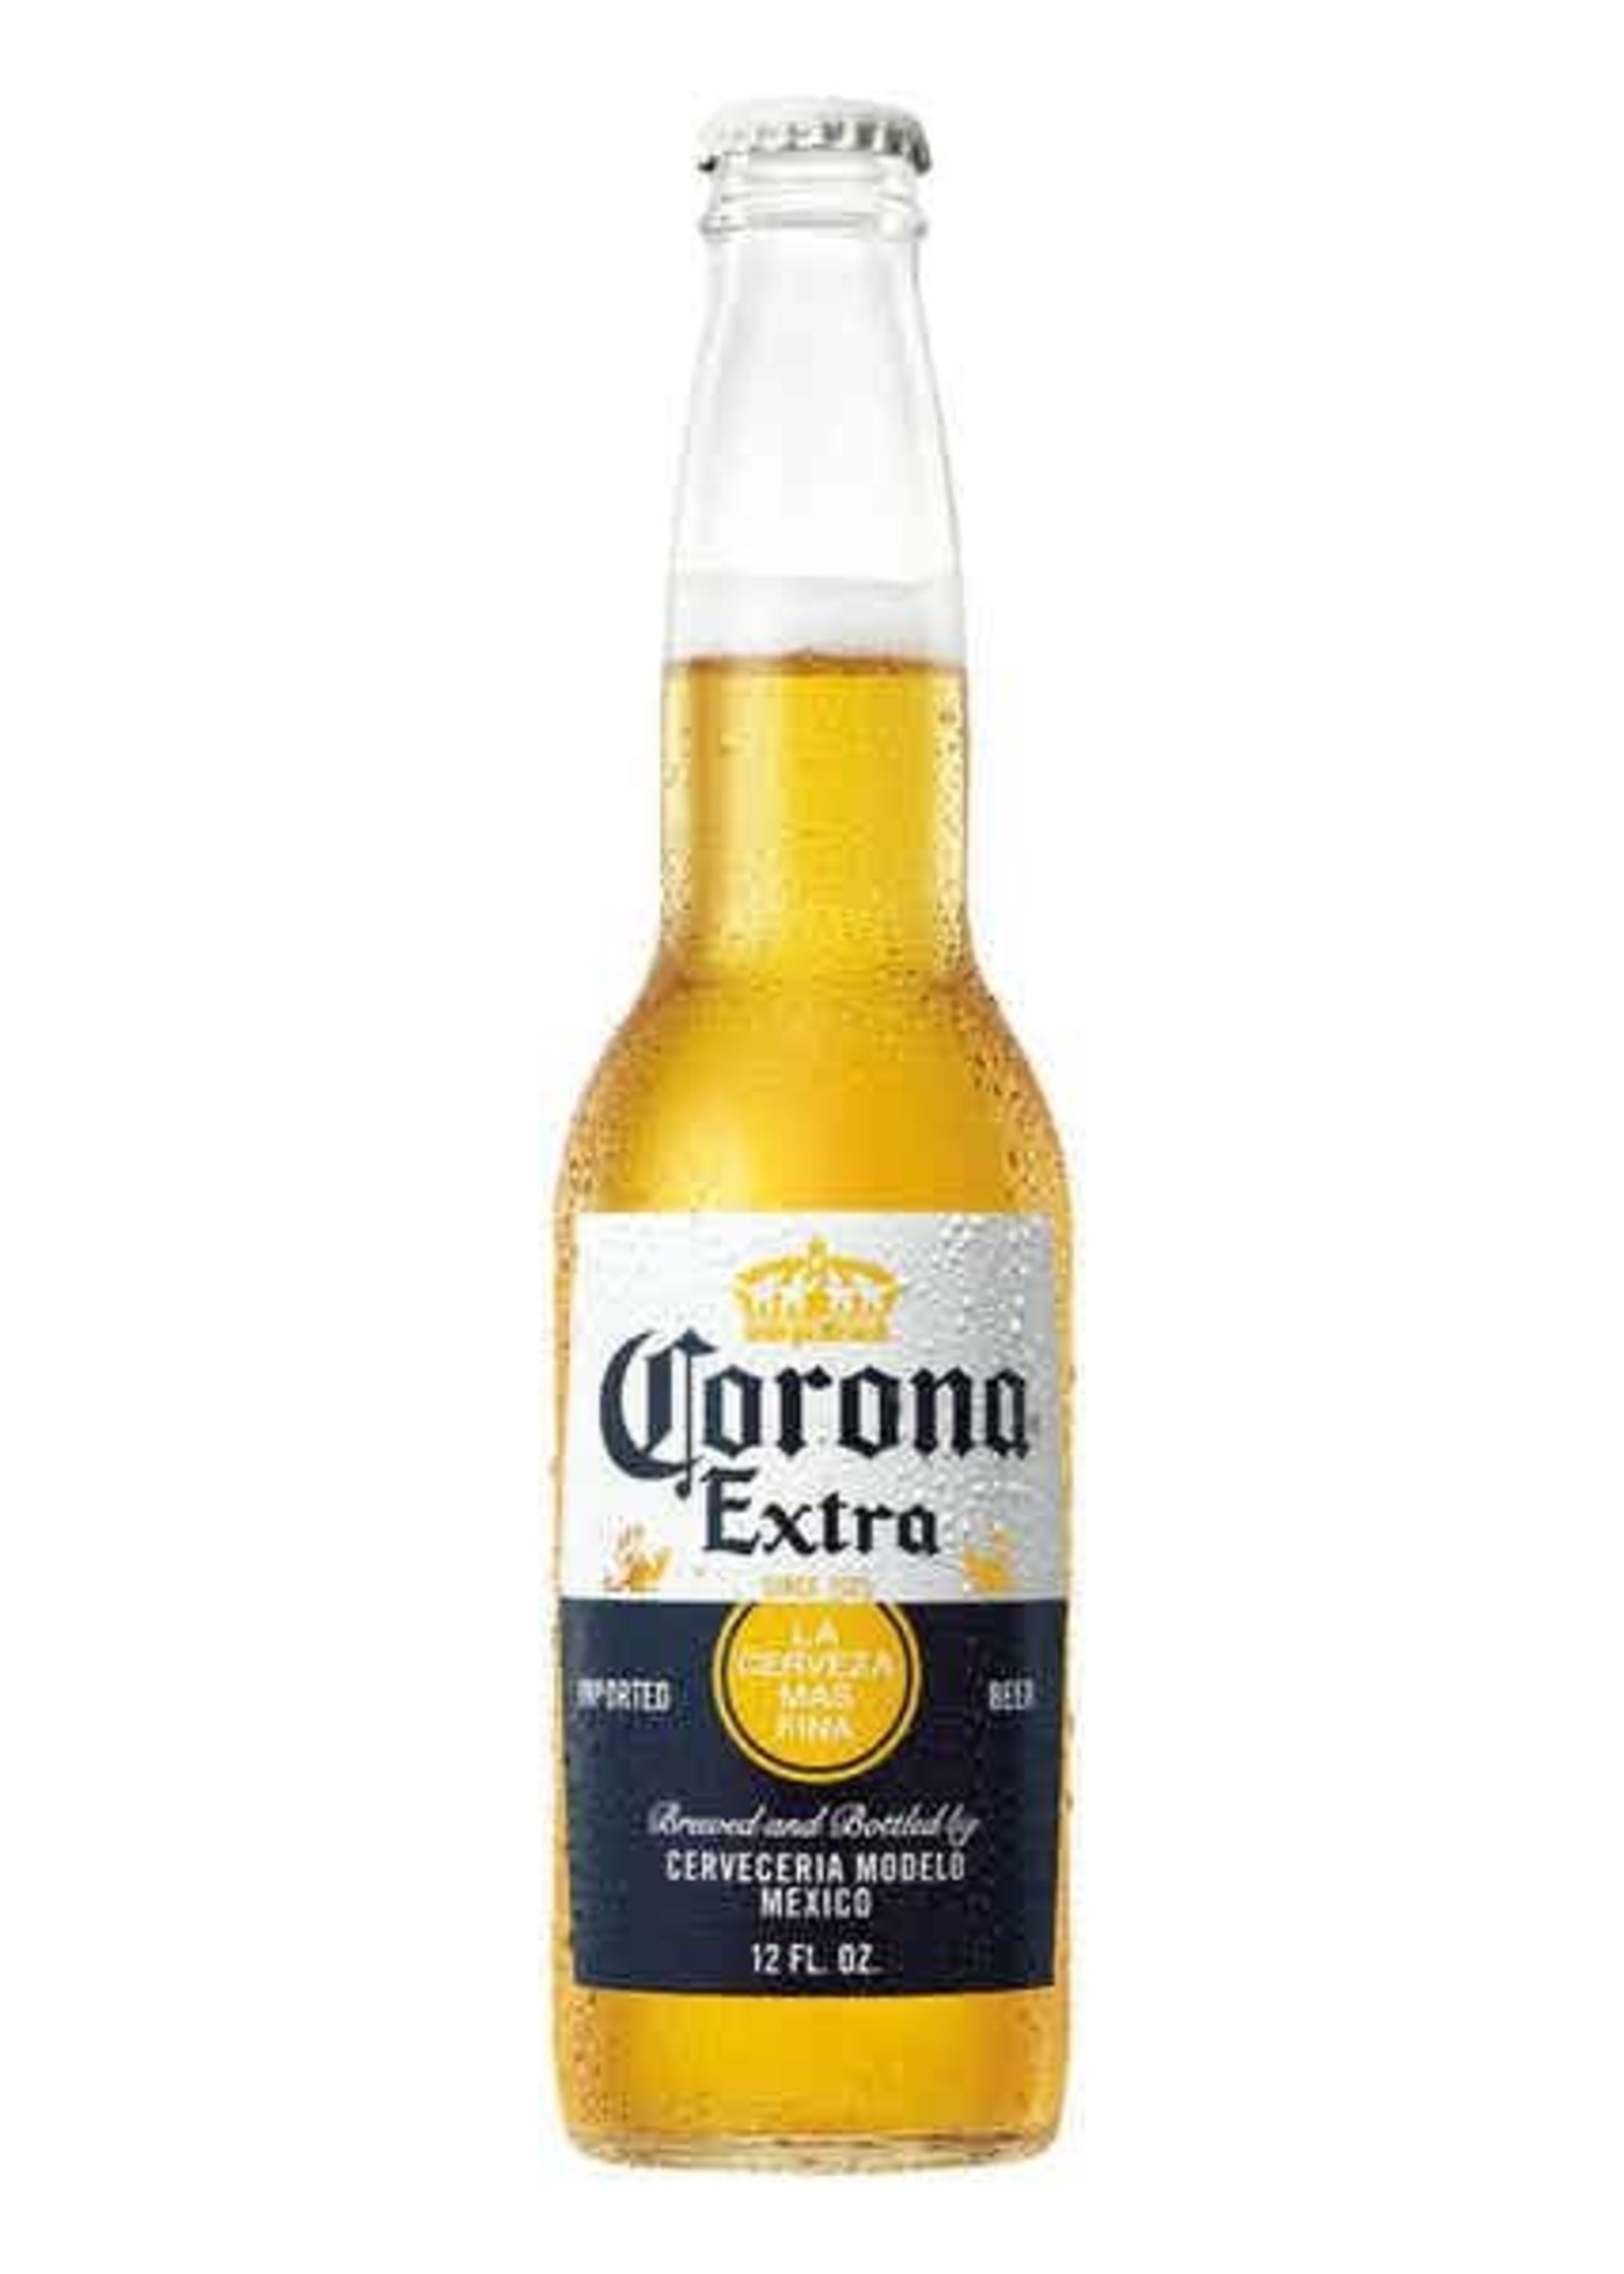 Corona Corona Extra Mexican Lager Beer (24 Pack Bottles)